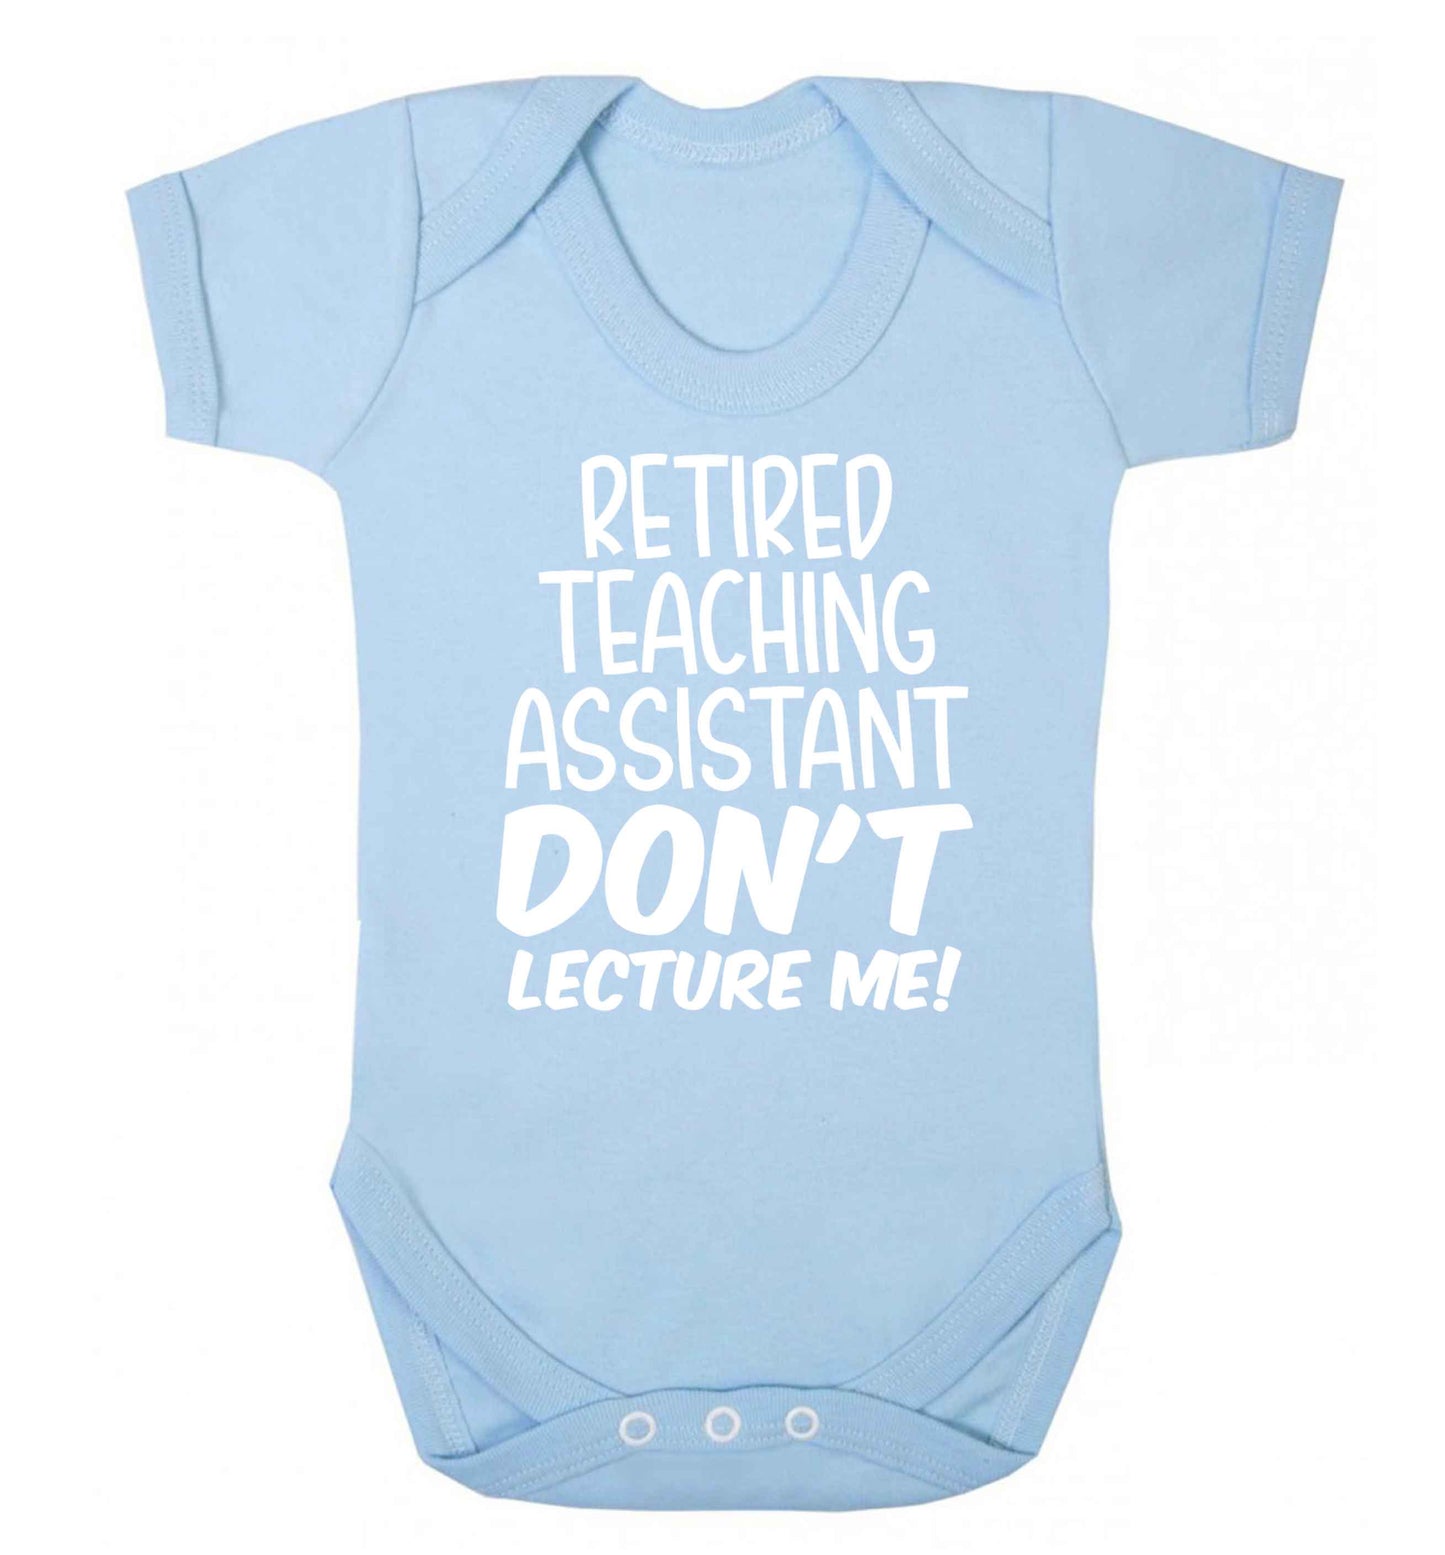 Retired teaching assistant don't lecture me Baby Vest pale blue 18-24 months